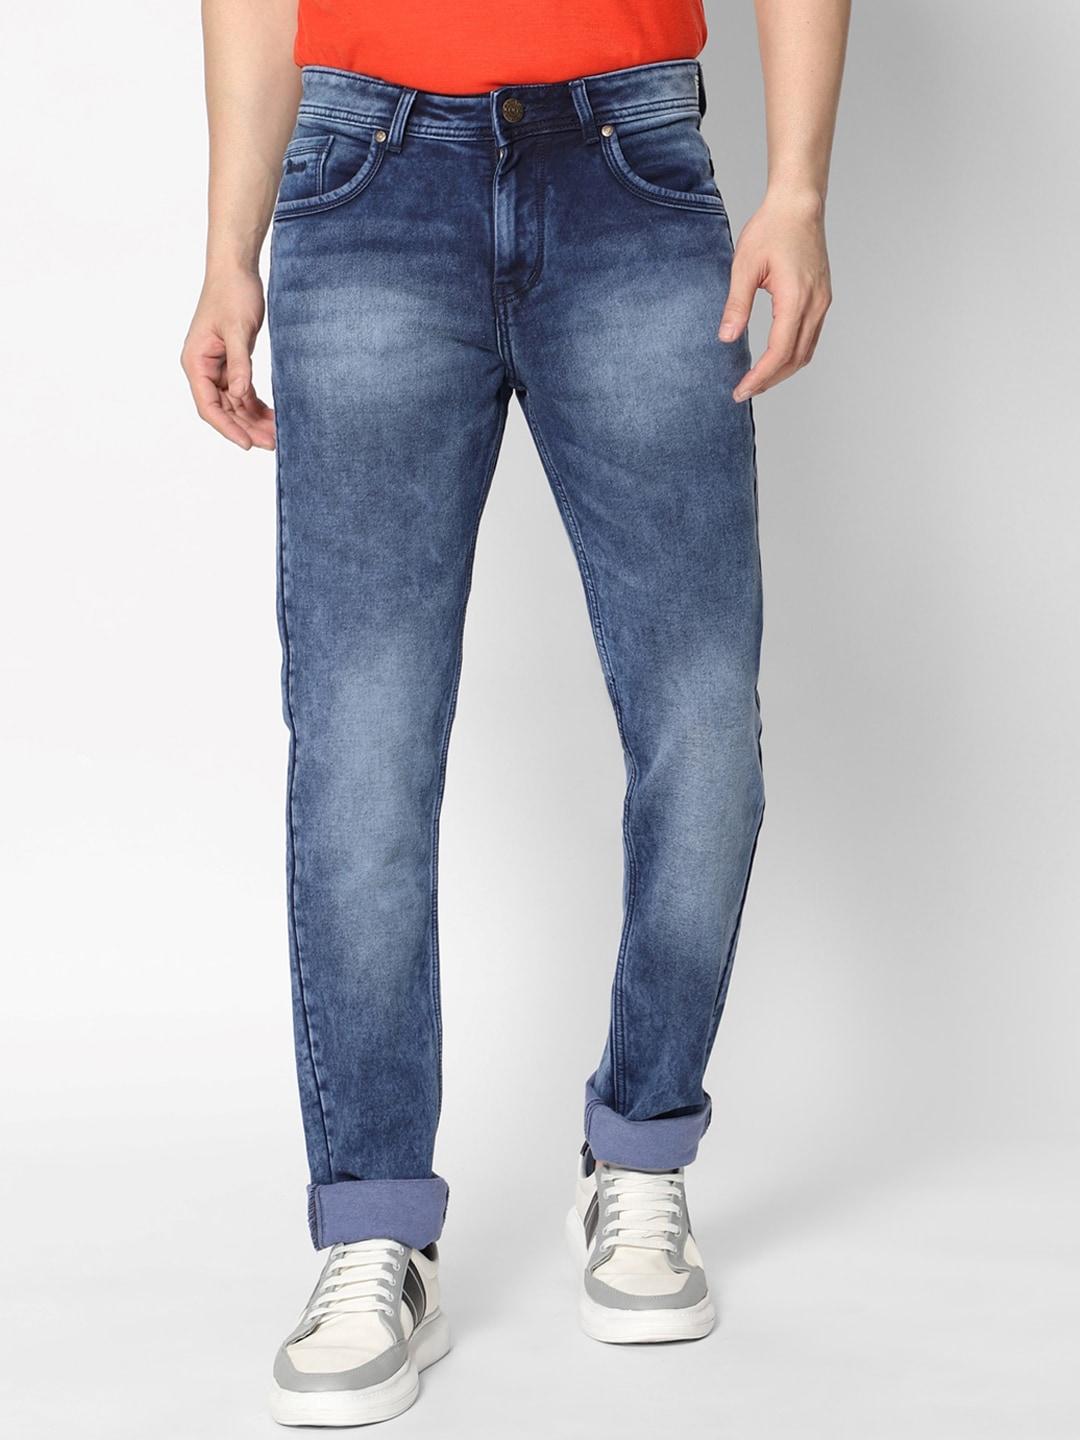 hj-hasasi-men-blue-light-fade-stretchable-jeans